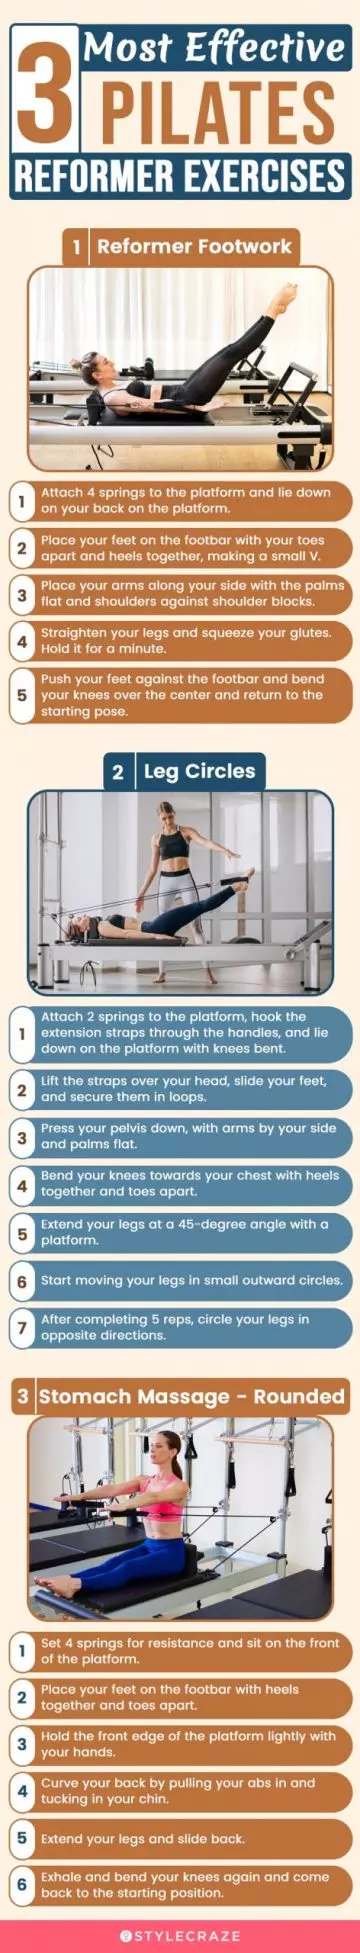 3 most effective pilates reformer exercises (infographic)